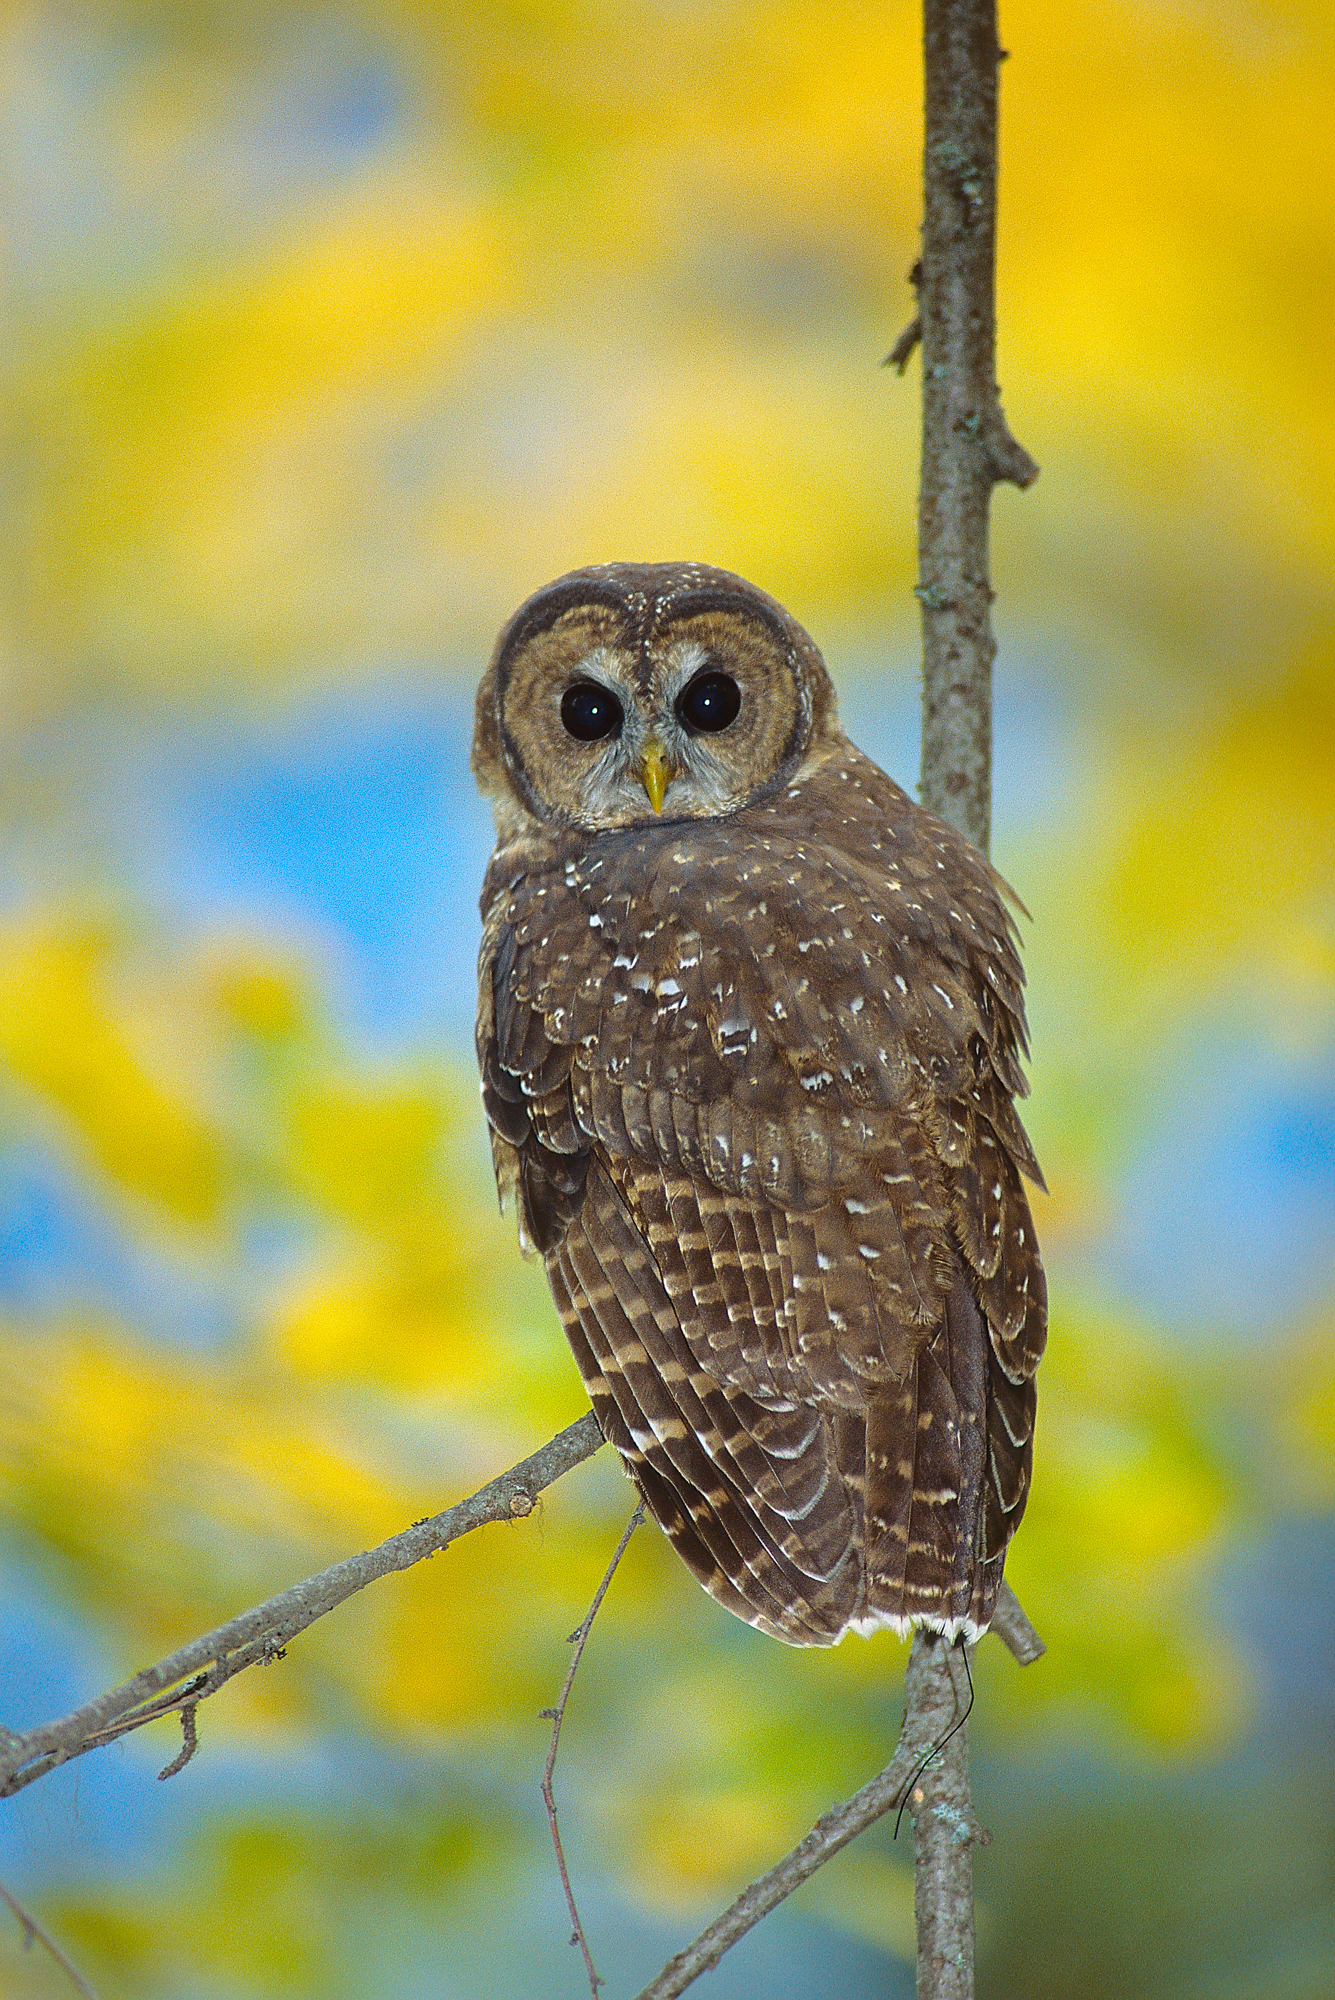 An adult female Northern Spotted Owl found in a nesting stand near Hope, B.C. Photo: Jared Hobbs